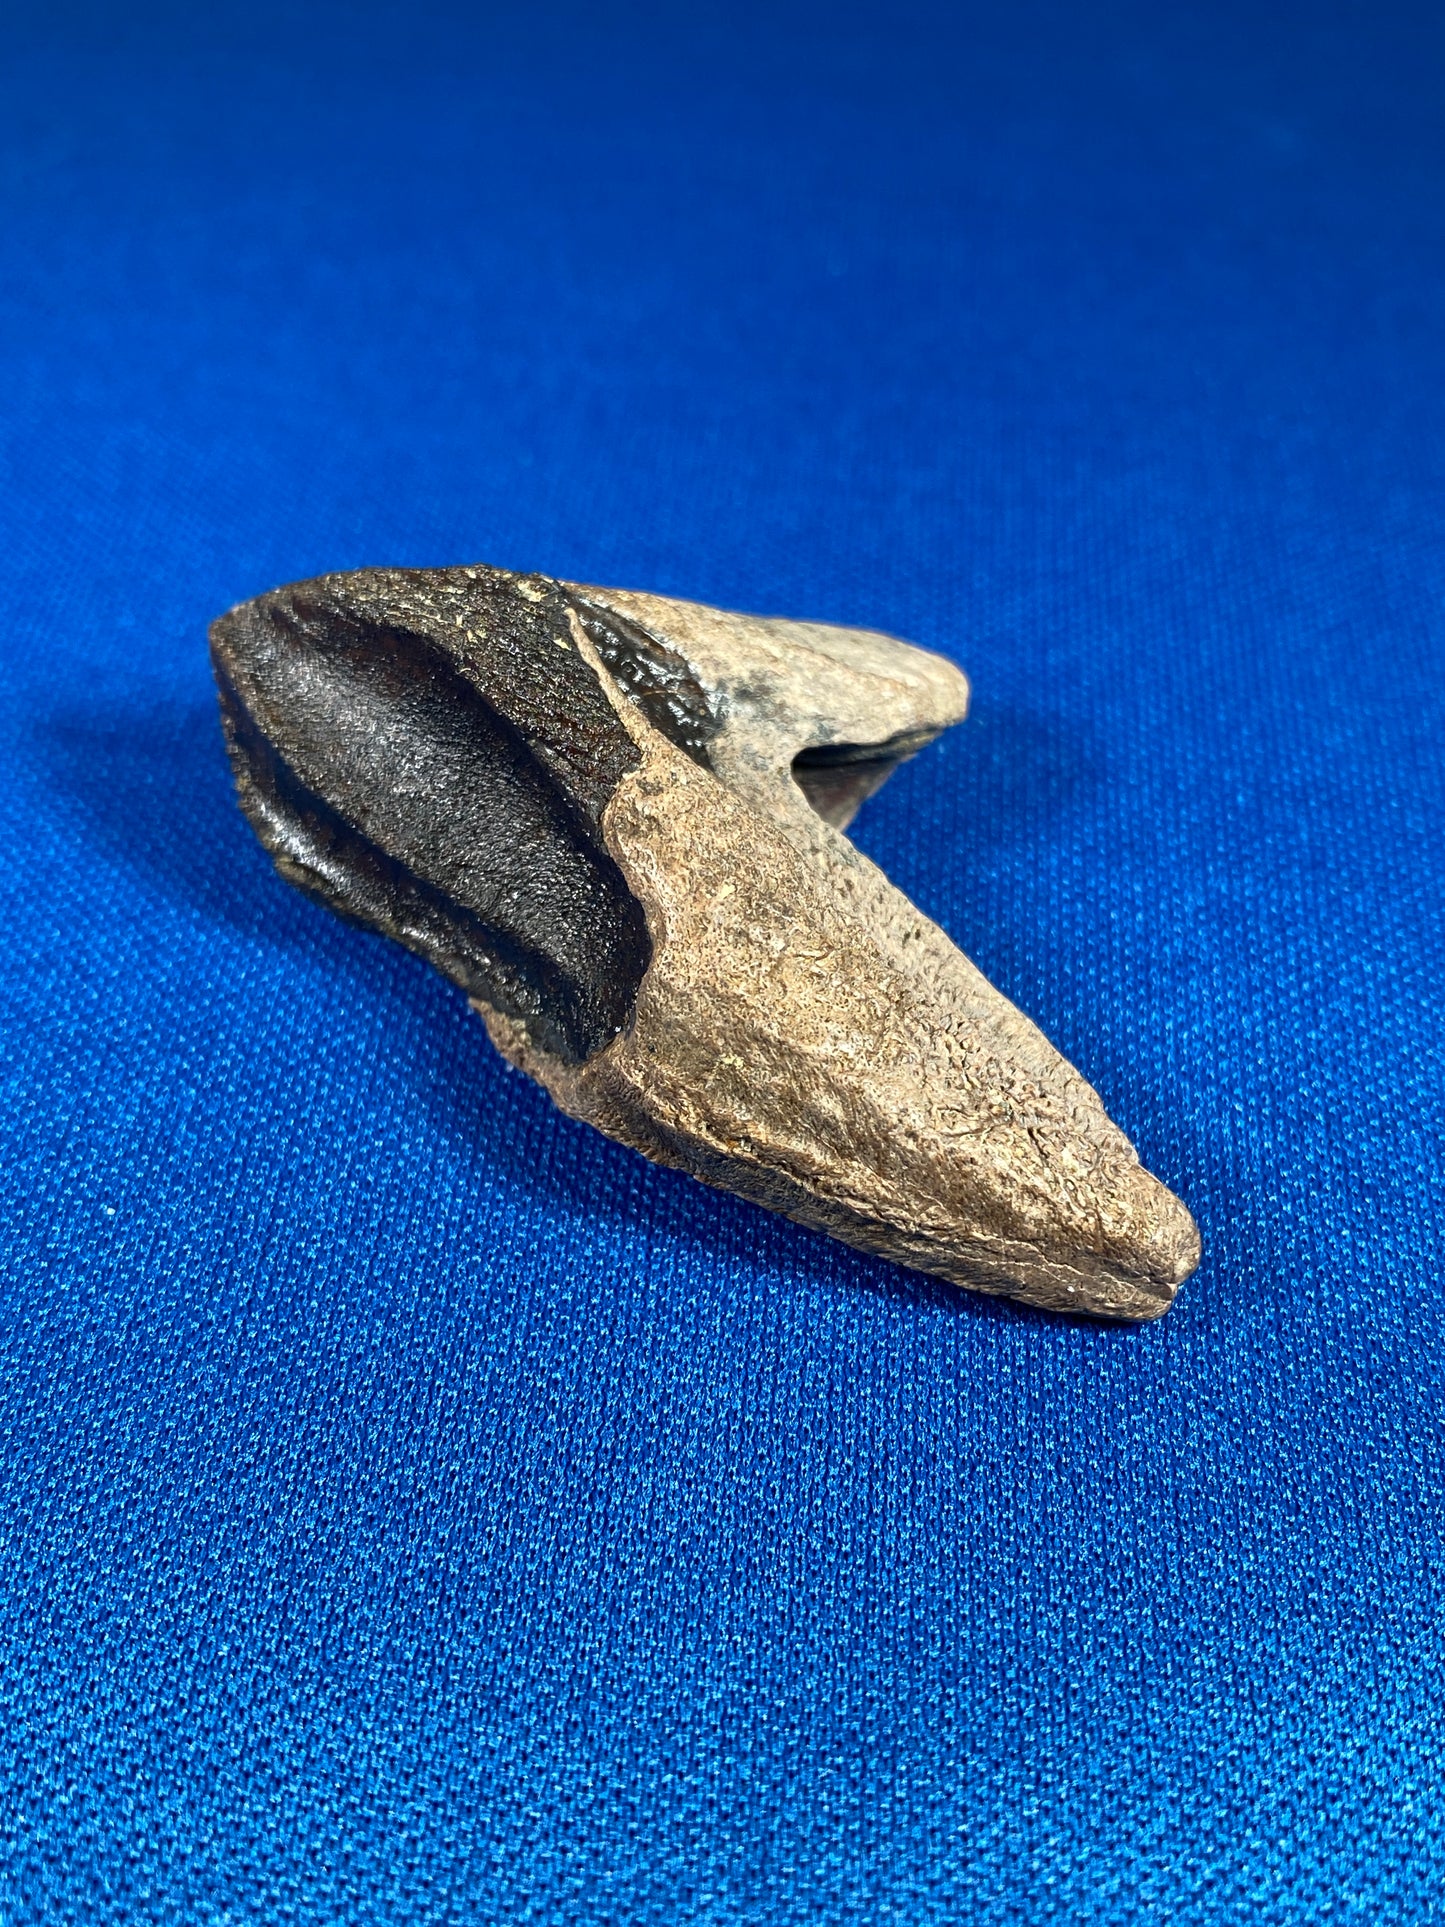 Triceratops tooth (2" long), Hell Creek Formation, Garfield County, Montana